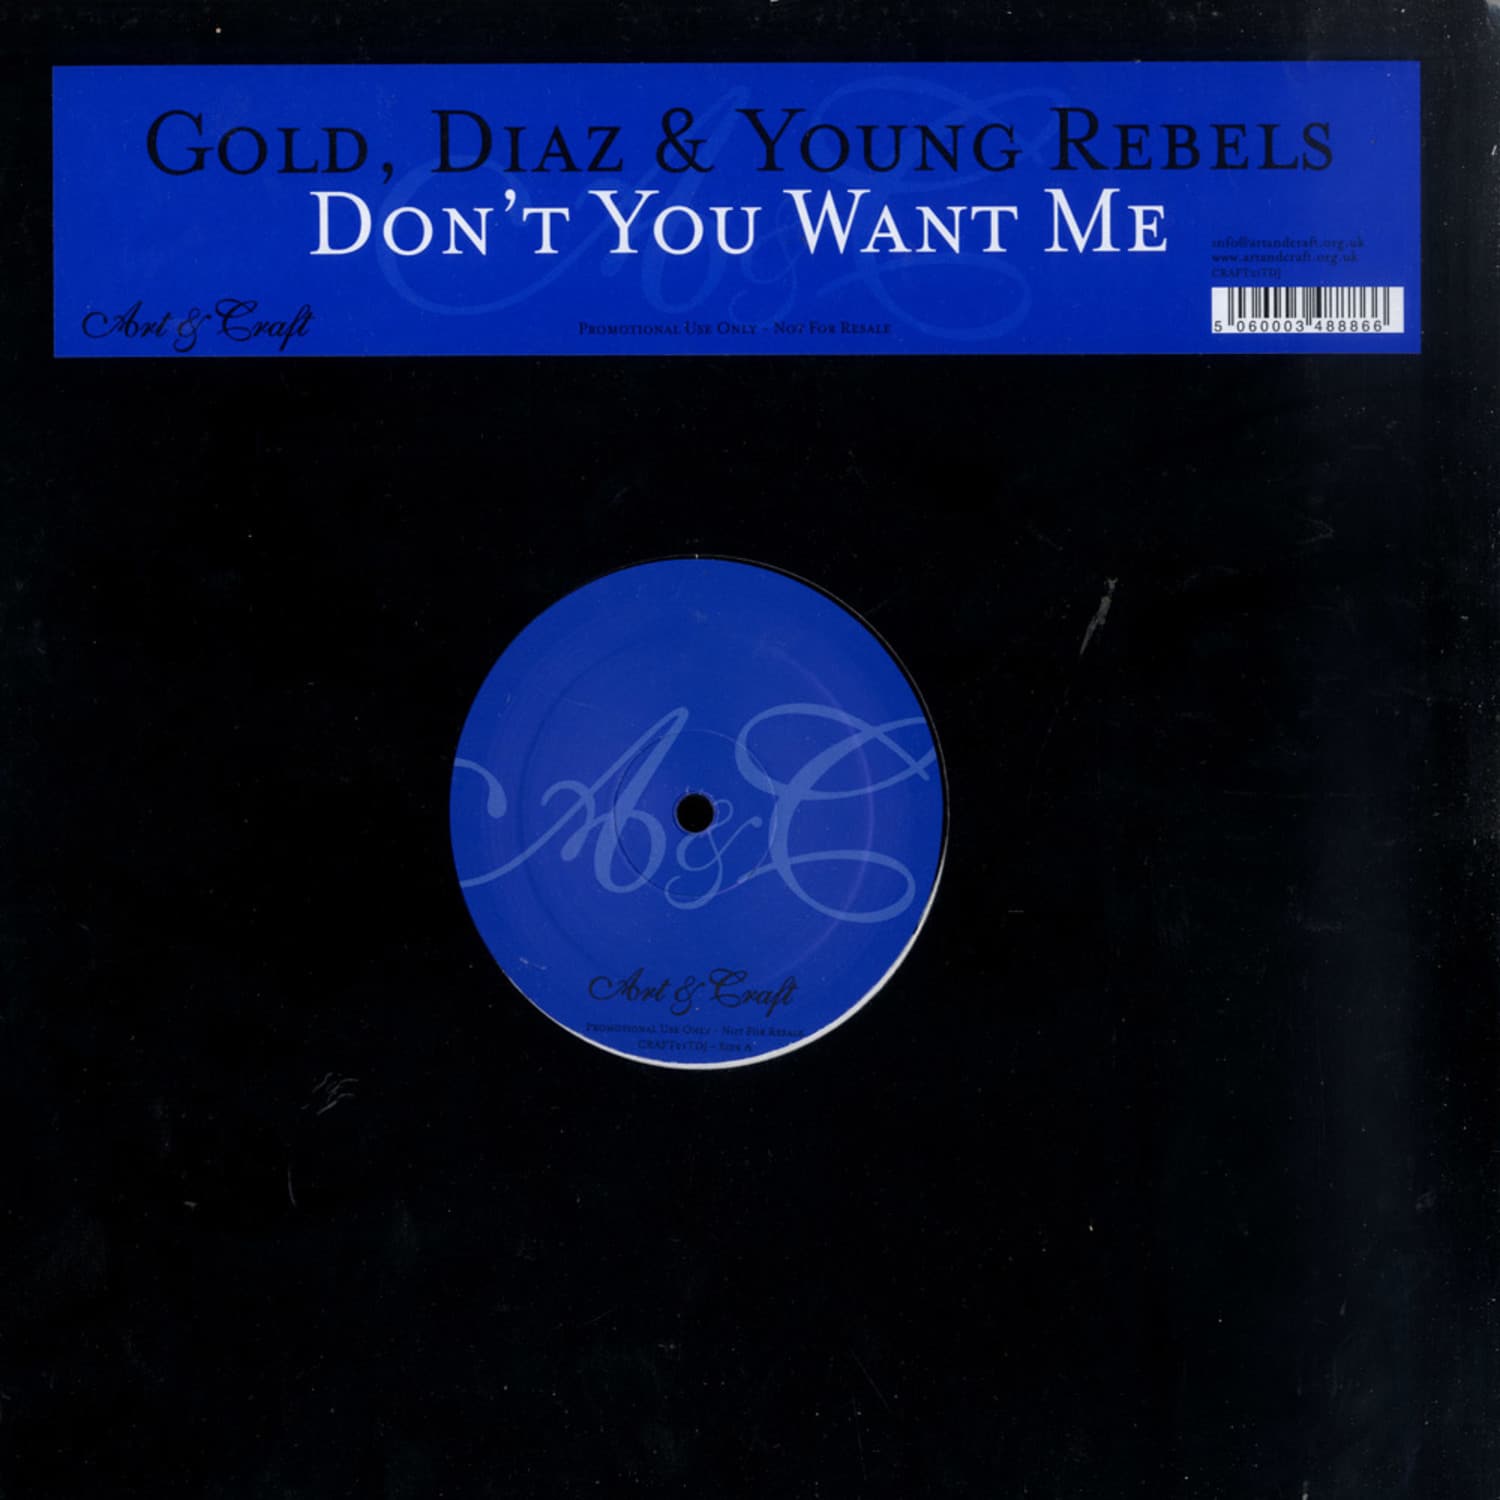 Gold, Diaz & Young Rebels - DON T YOU WANT ME